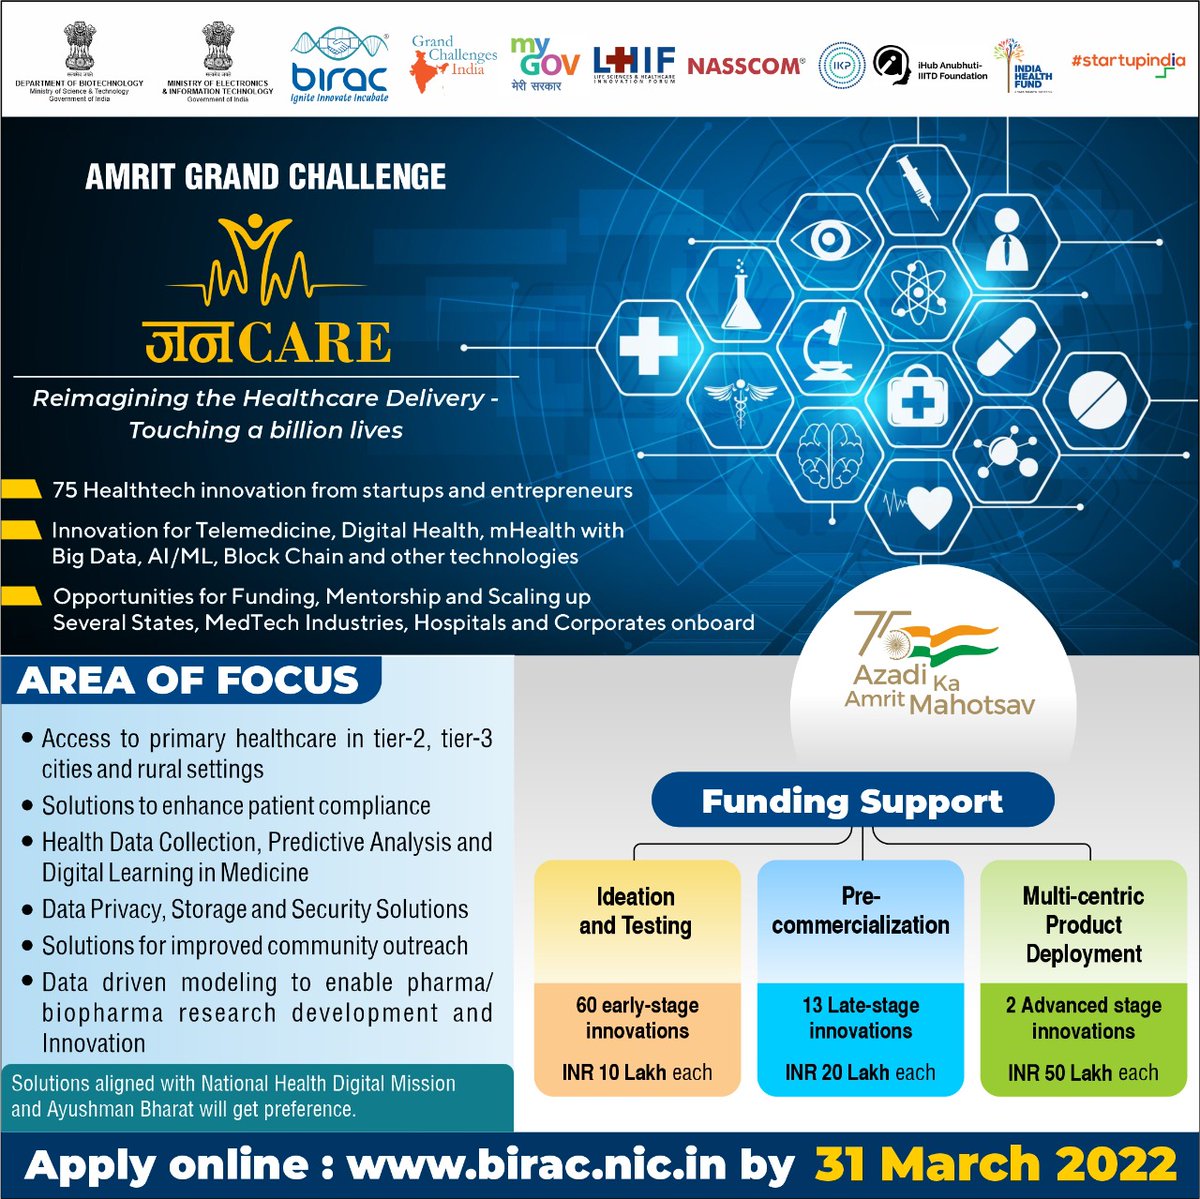 @DBTIndia @BIRAC_2012 in collaboration with @nasscom #GCI and other partners @AnubhutiIhub @IndiaHealthFund @IKP_SciencePark @startupindia @mygovindia open the call for application under Amrit Grand Challenge #JanCARE Apply by 31 March 2022 visit – birac.nic.in